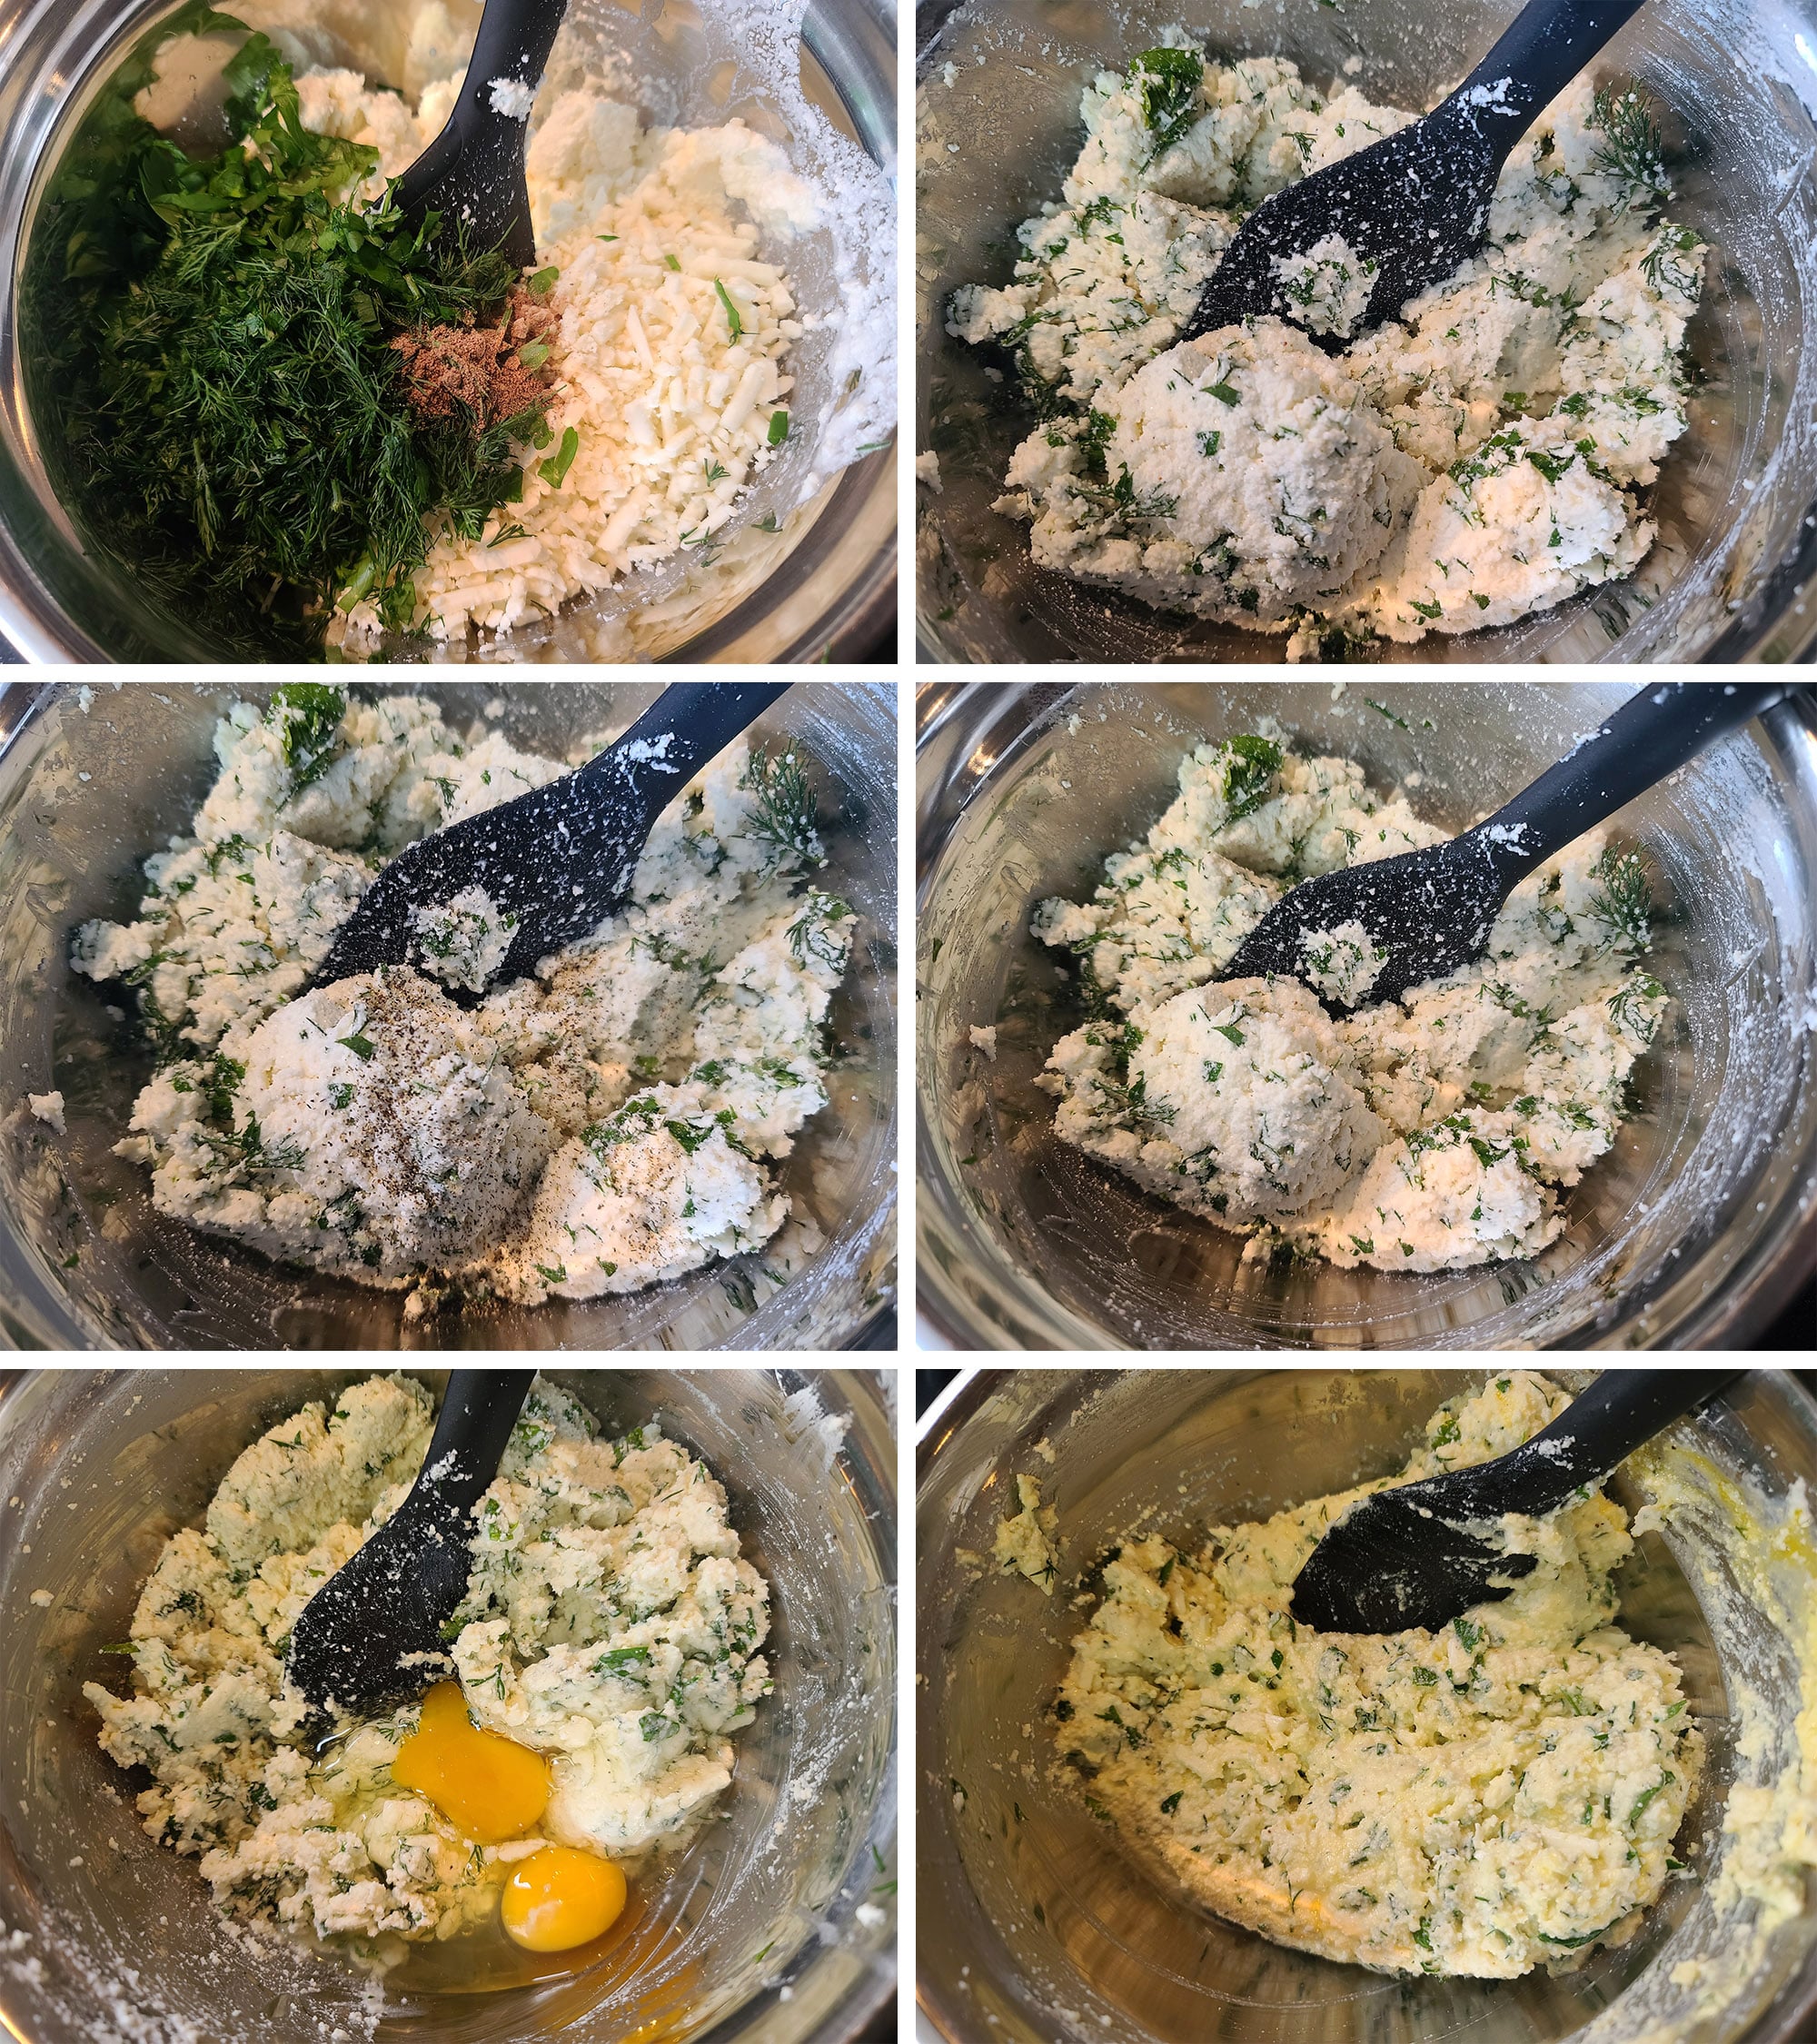 A 6 part image showing the ricotta and feta mixture being made.